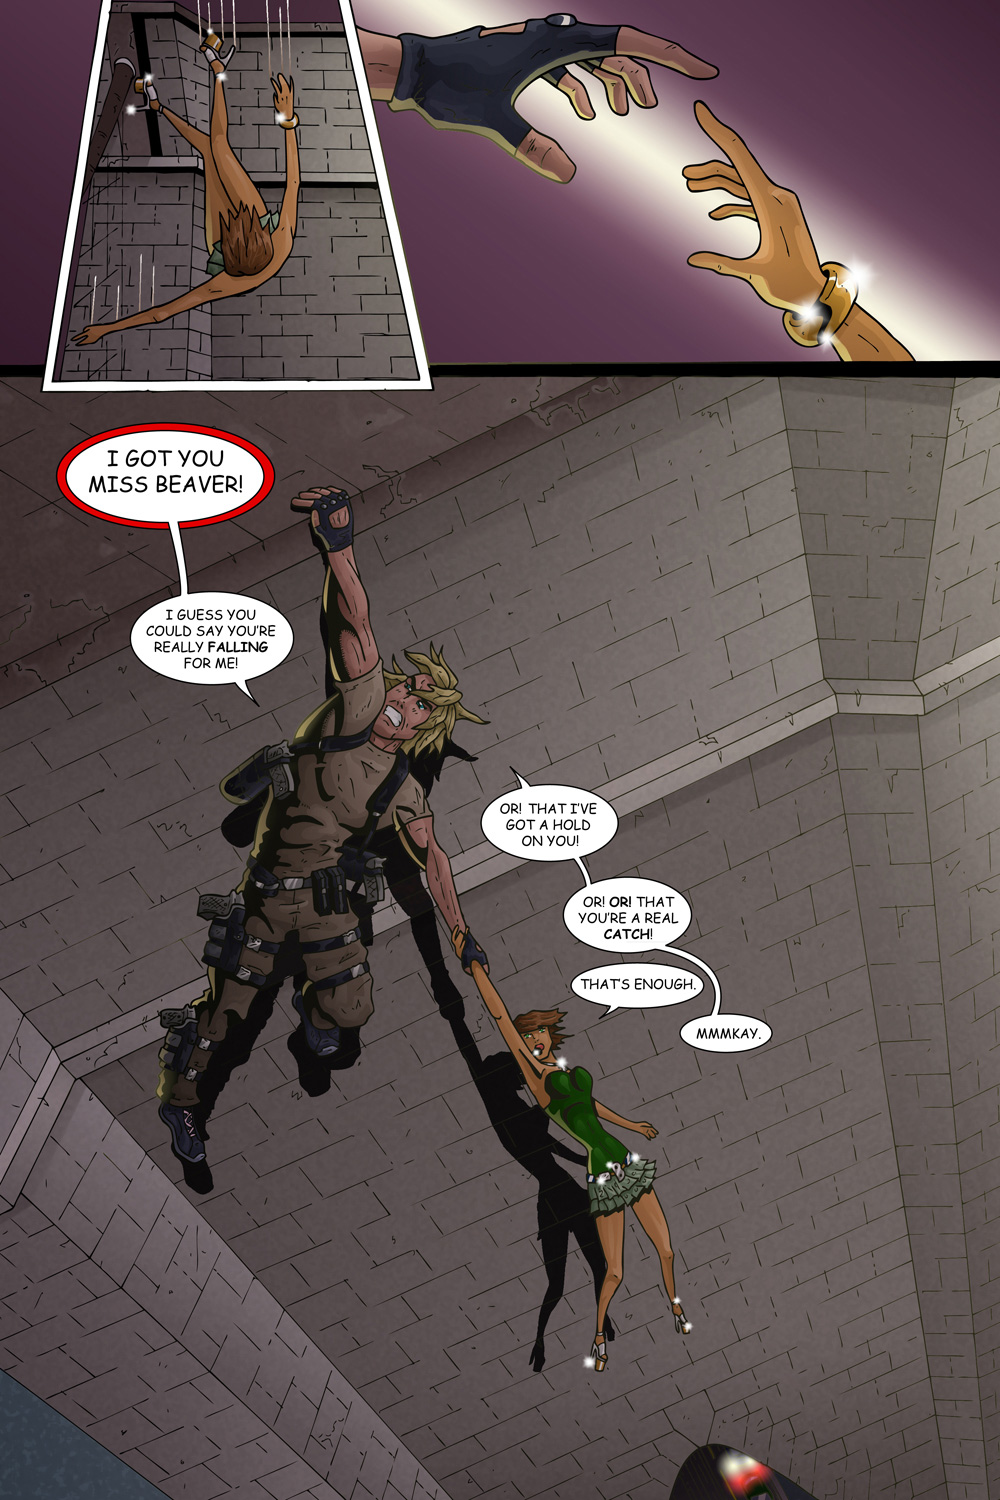 MISSION 004: PAGE 20 “THAT’S ENOUGH”